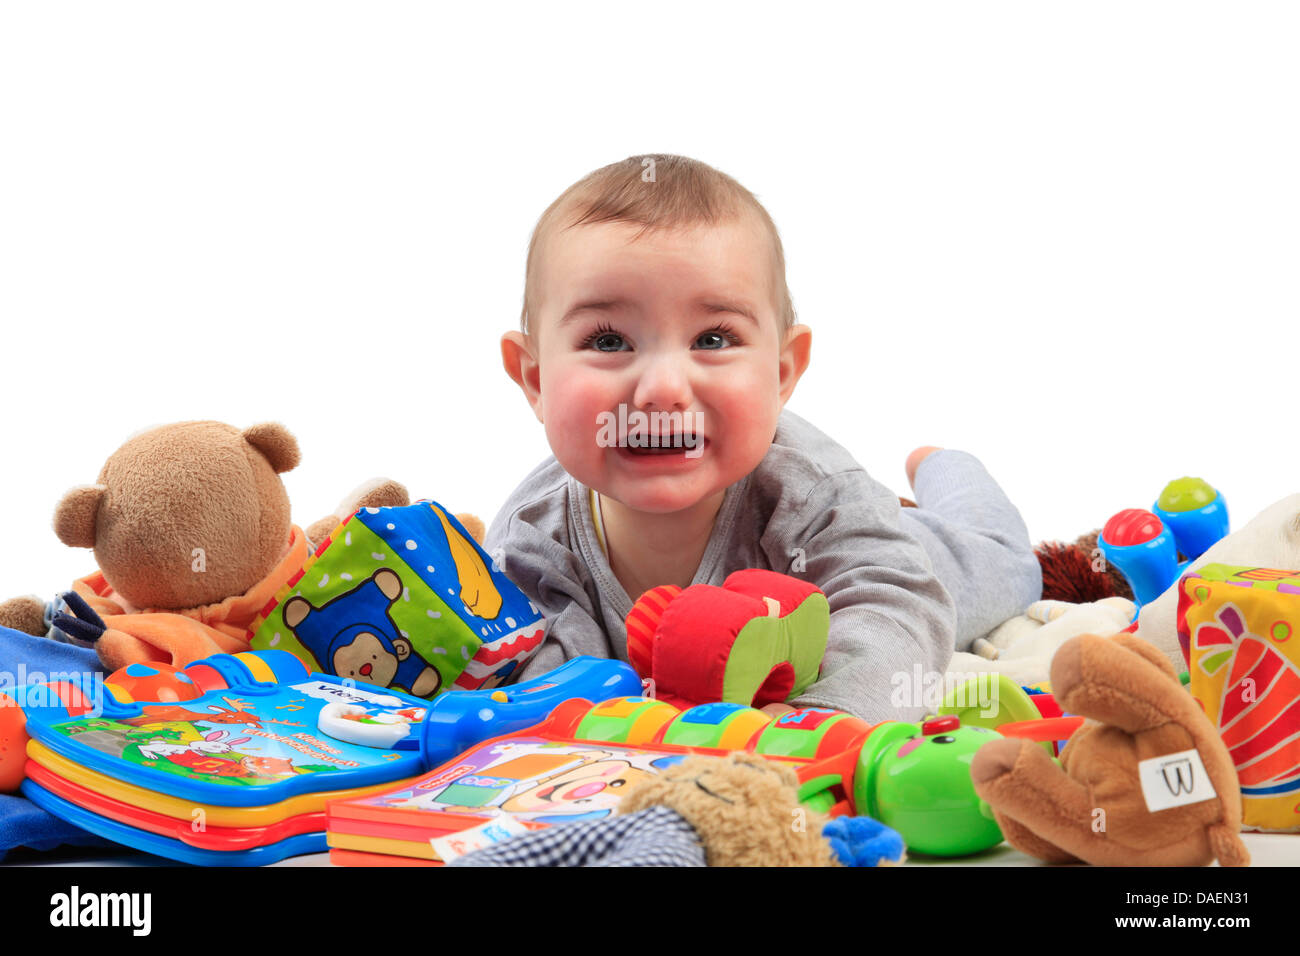 baby lying in a heap of playthings and crying Stock Photo